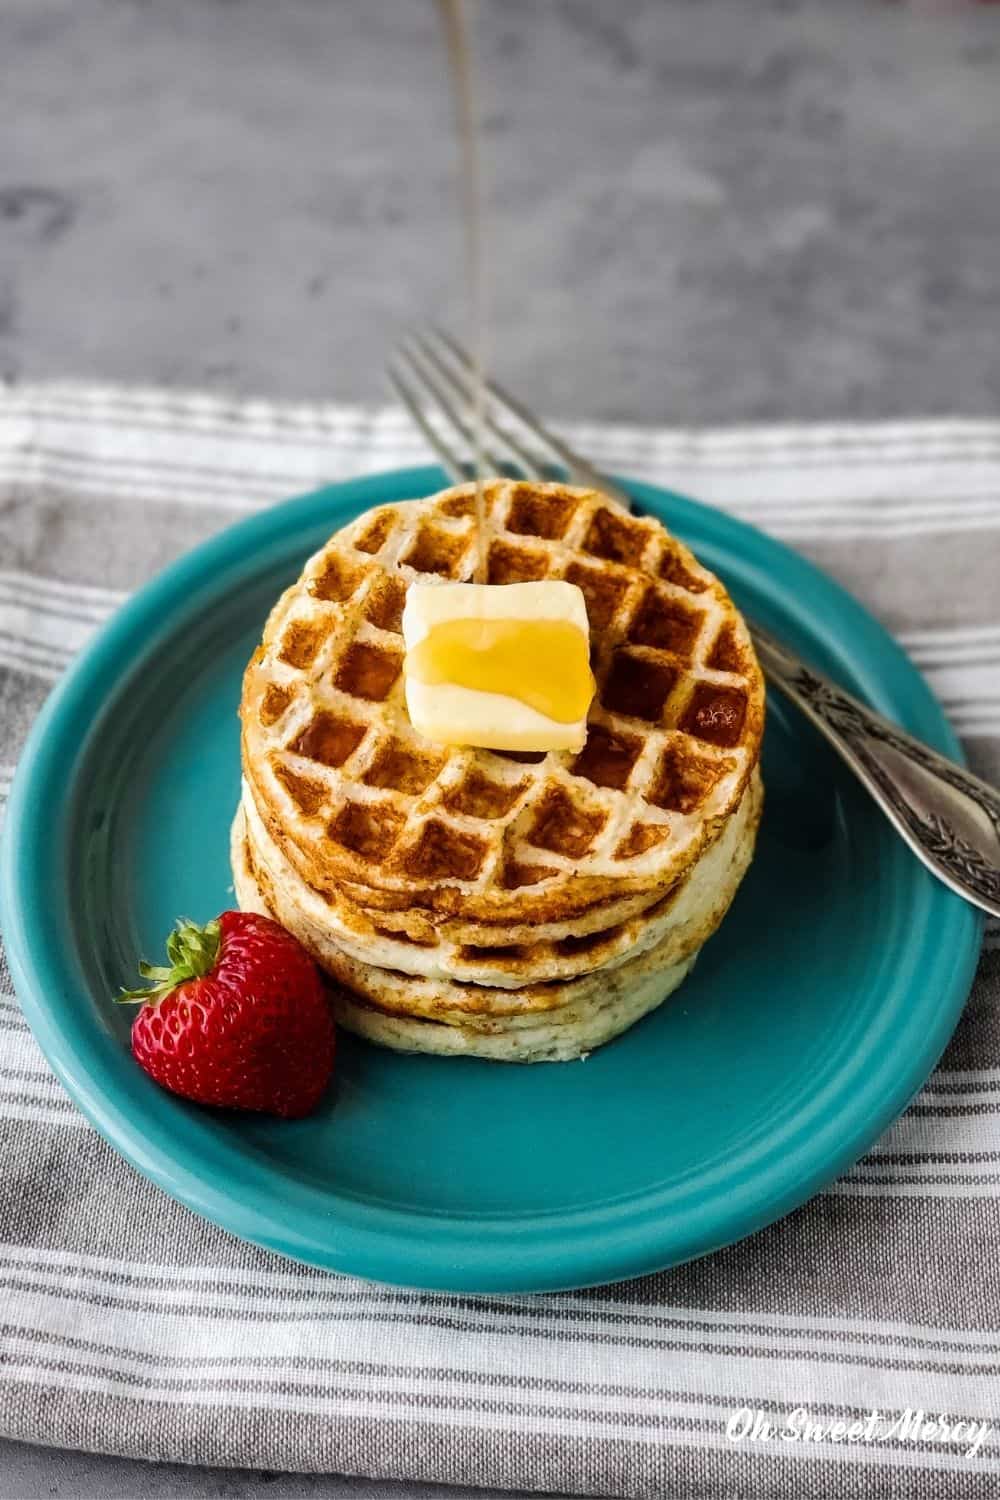 https://www.ohsweetmercy.com/wp-content/uploads/2021/02/Easy-Mini-Waffles-with-syrup.jpg